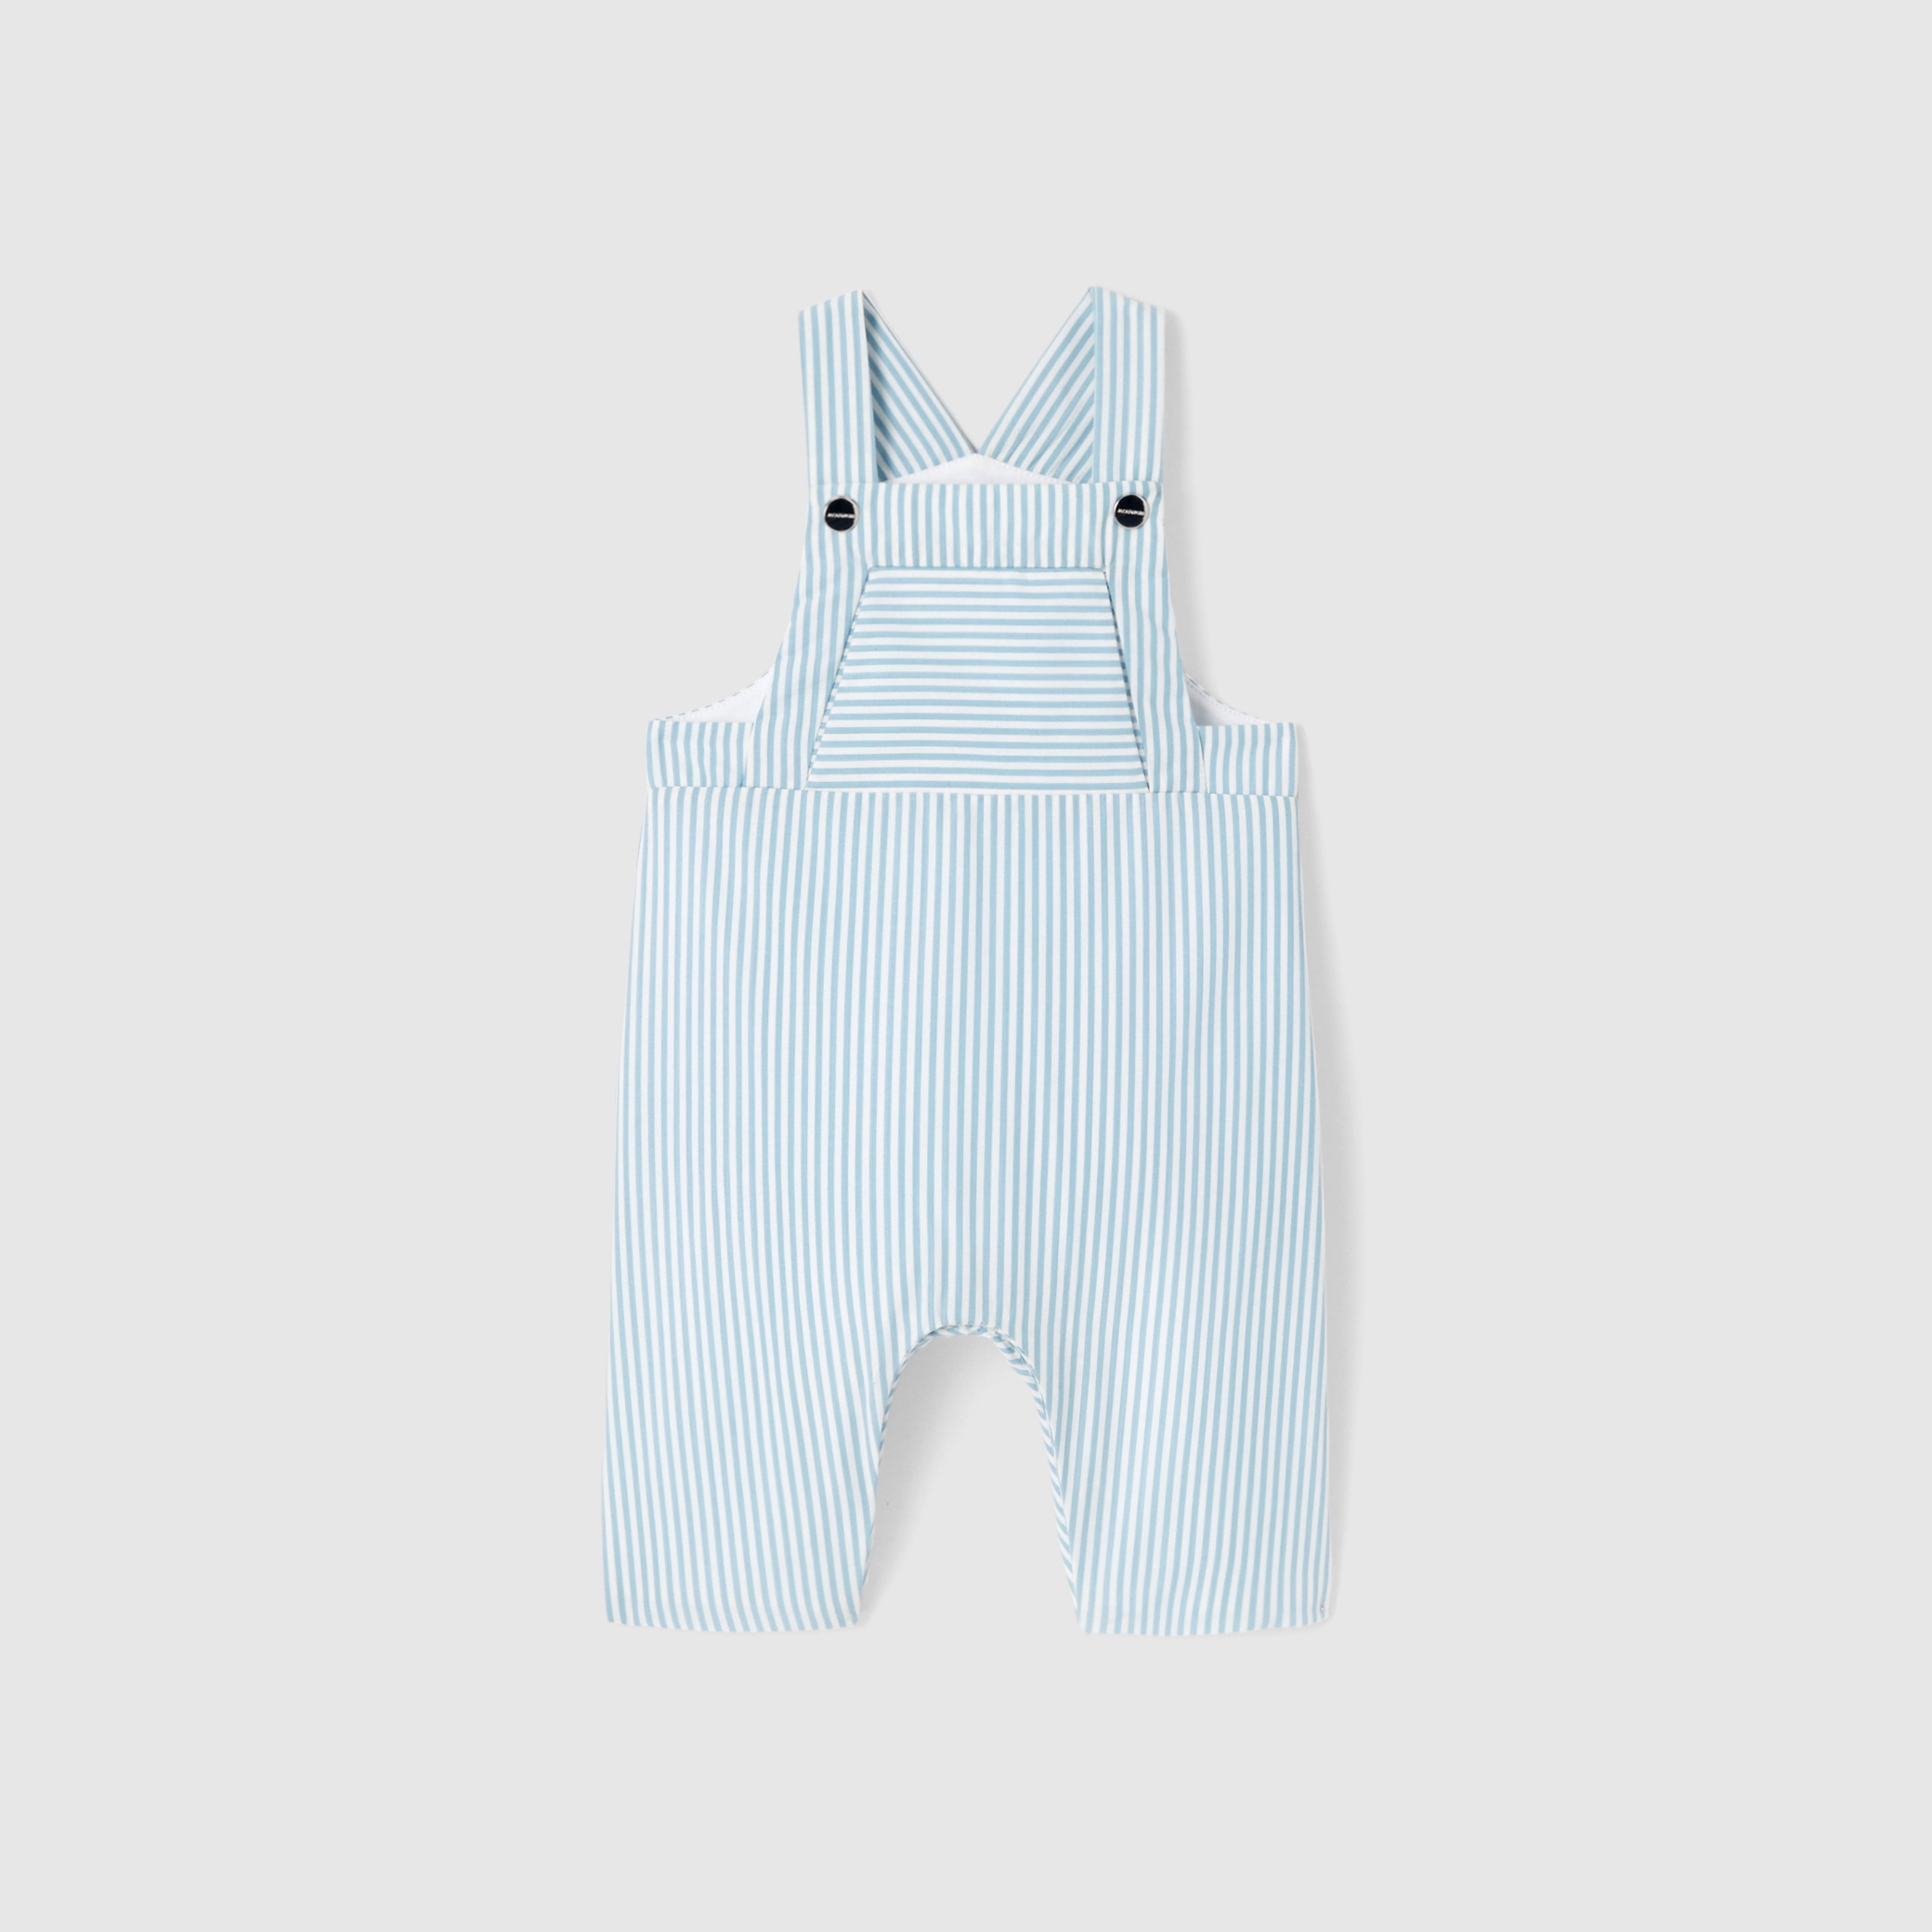 Baby boy striped overalls